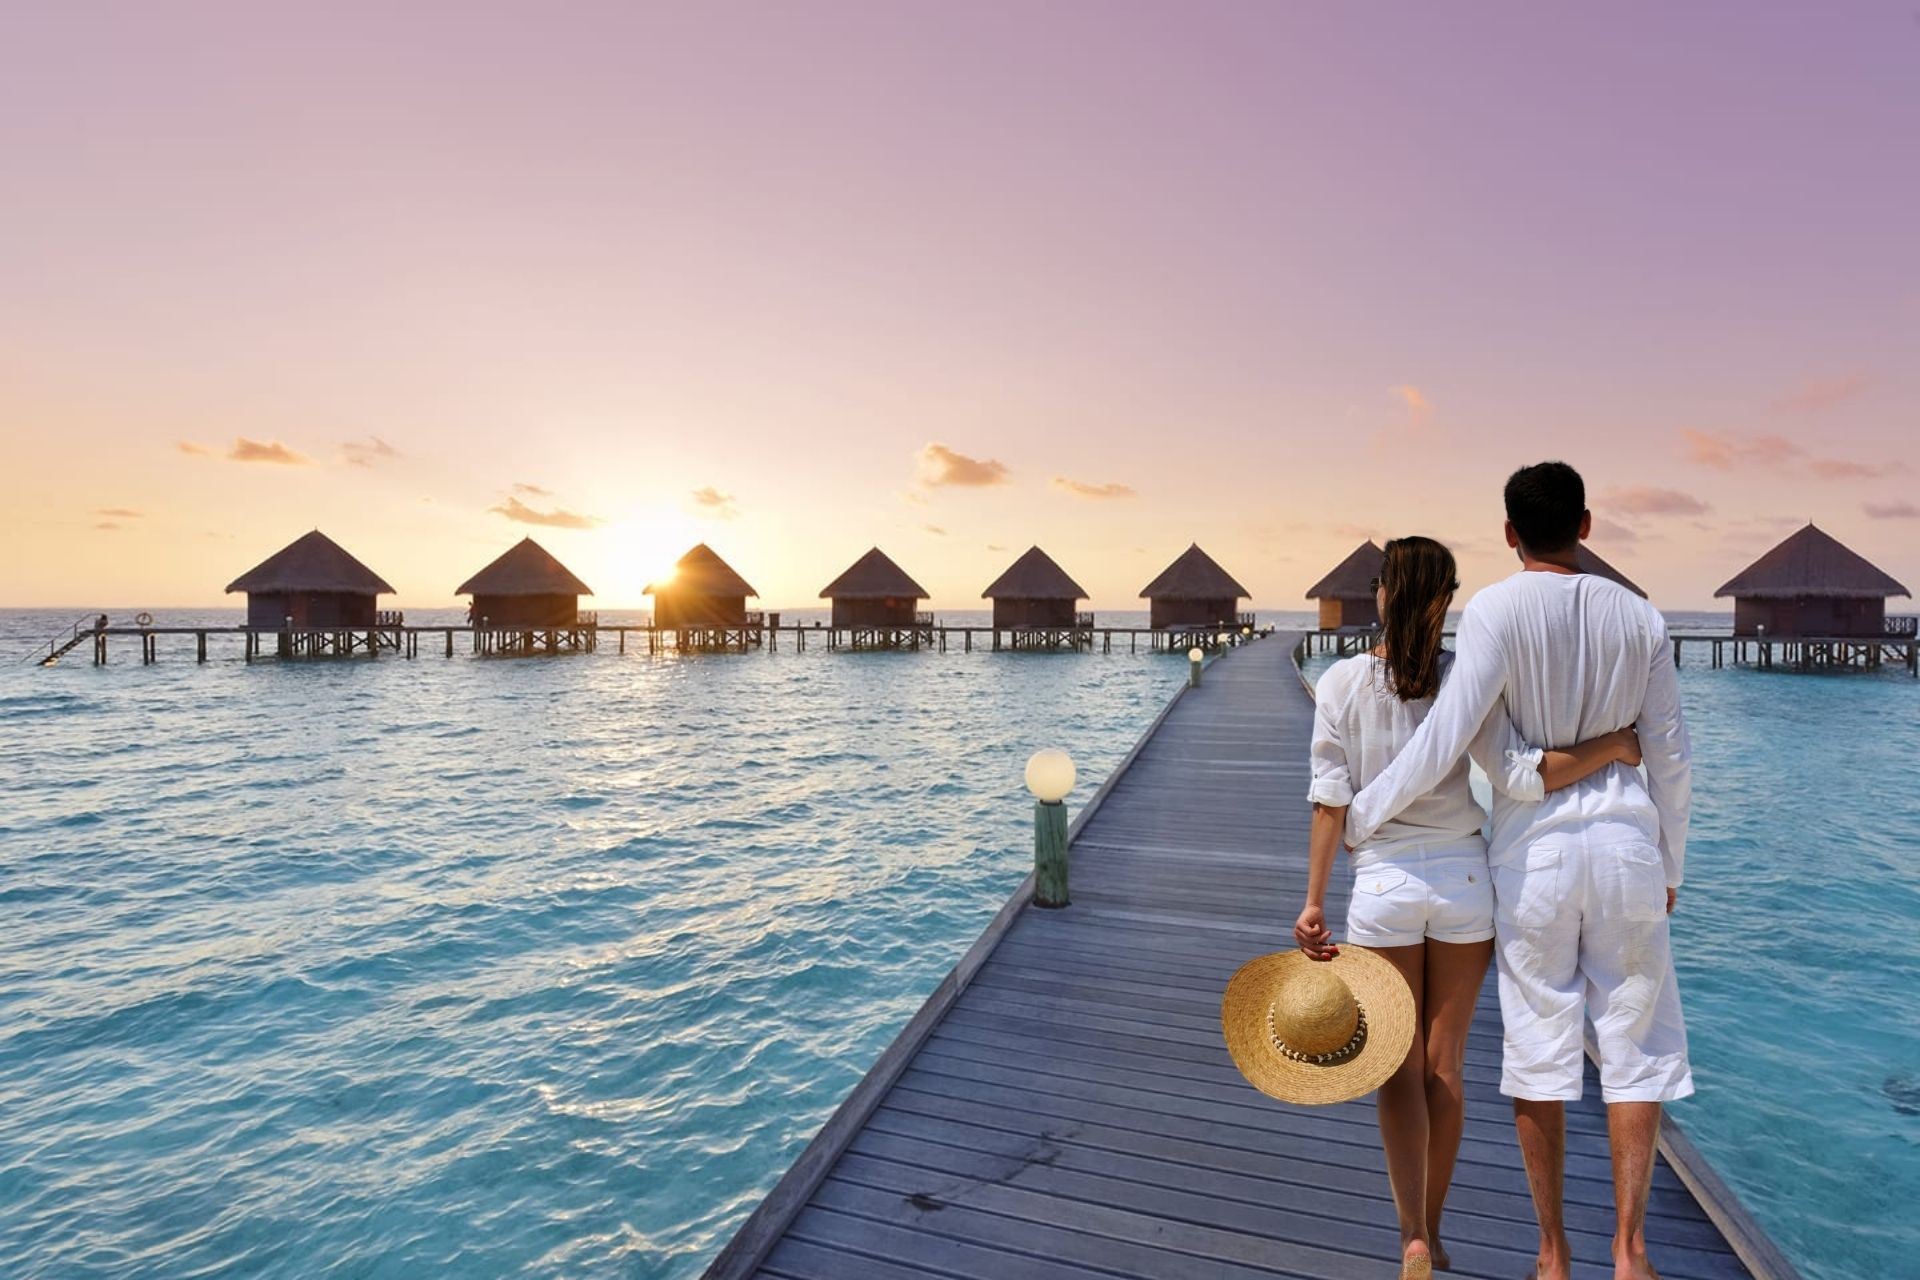 Maldives Honeymoon Packages From Delhi All Inclusive Cost And Itinerary